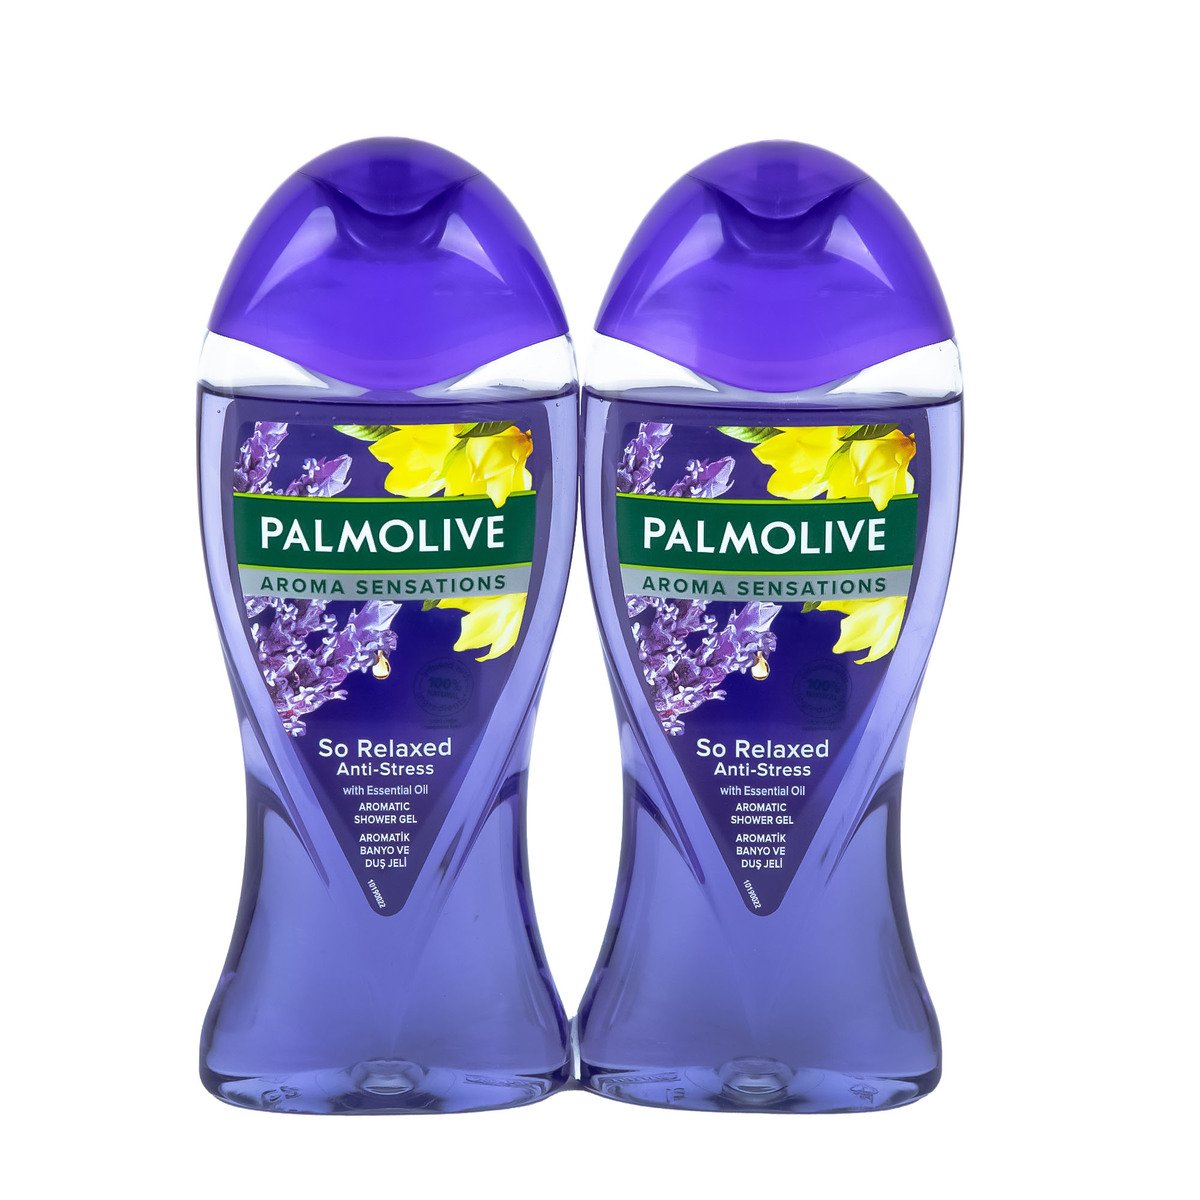 Palmolive Aroma Sensations Relaxed Anti-Stress Shower Gel Value Pack 2 x 250 ml